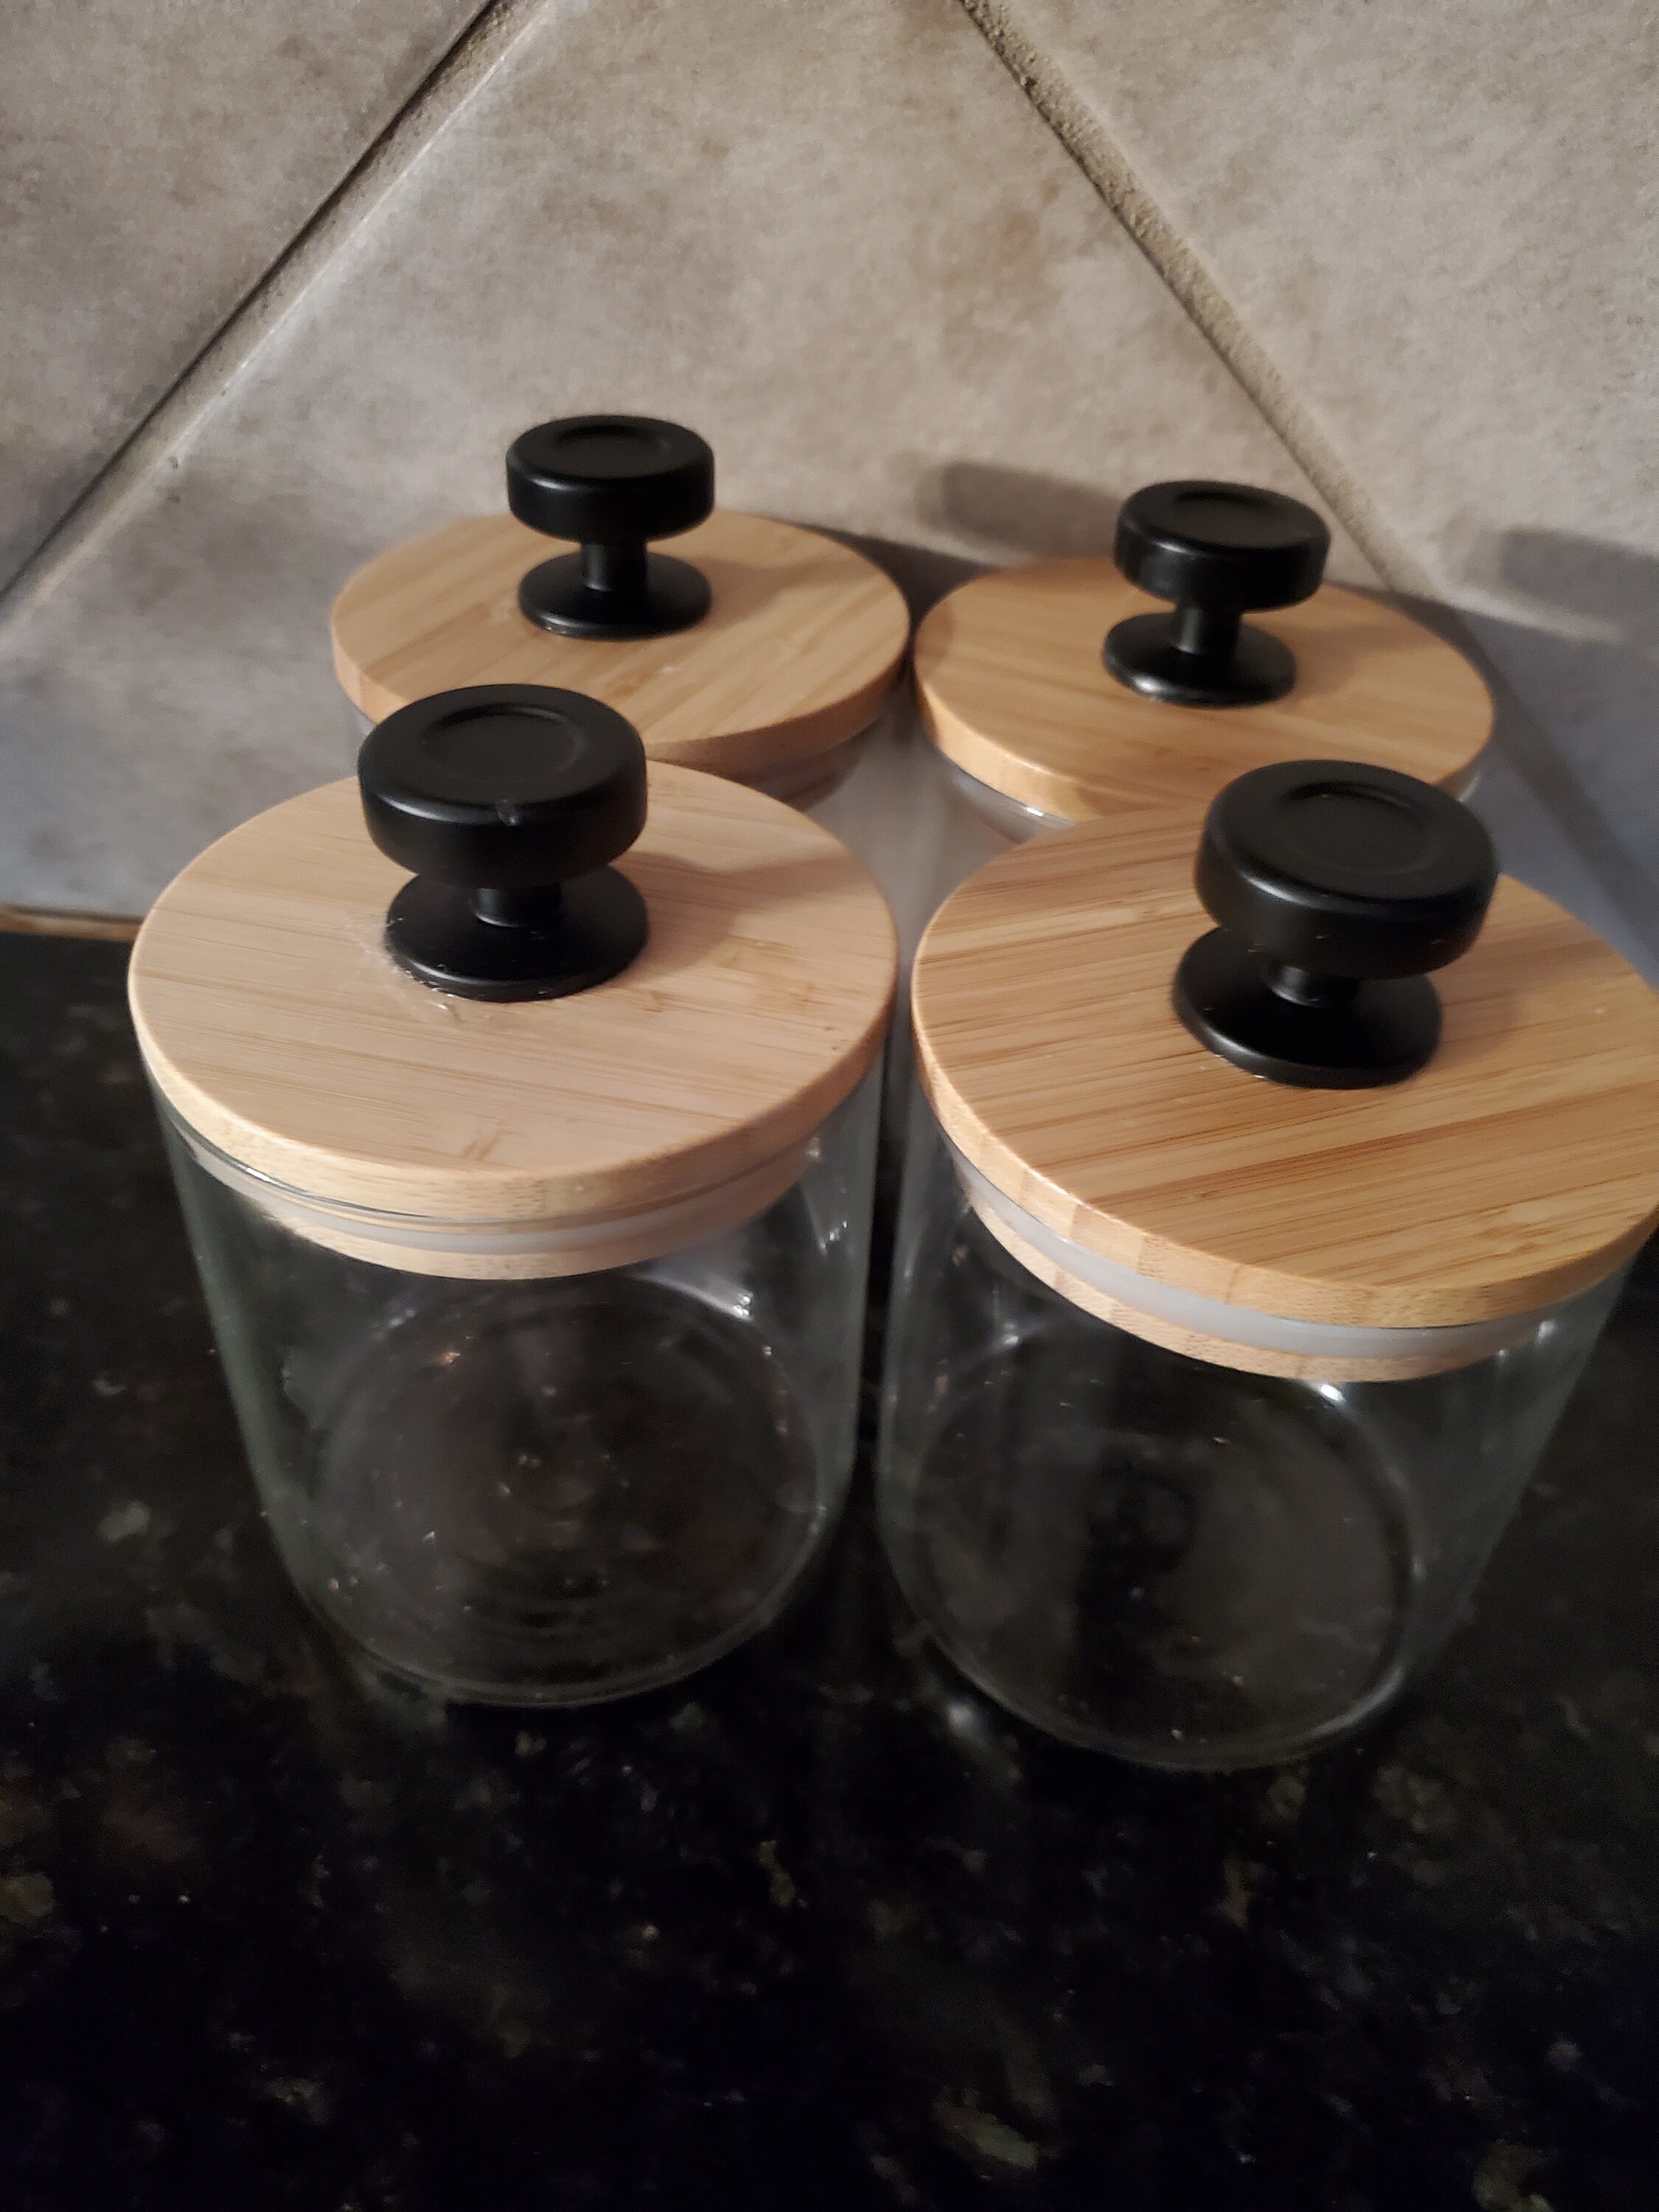 Crutello 20 Pack 4 Oz Spice Jars with Black Bamboo Lids for Spices, Ho -  crutello